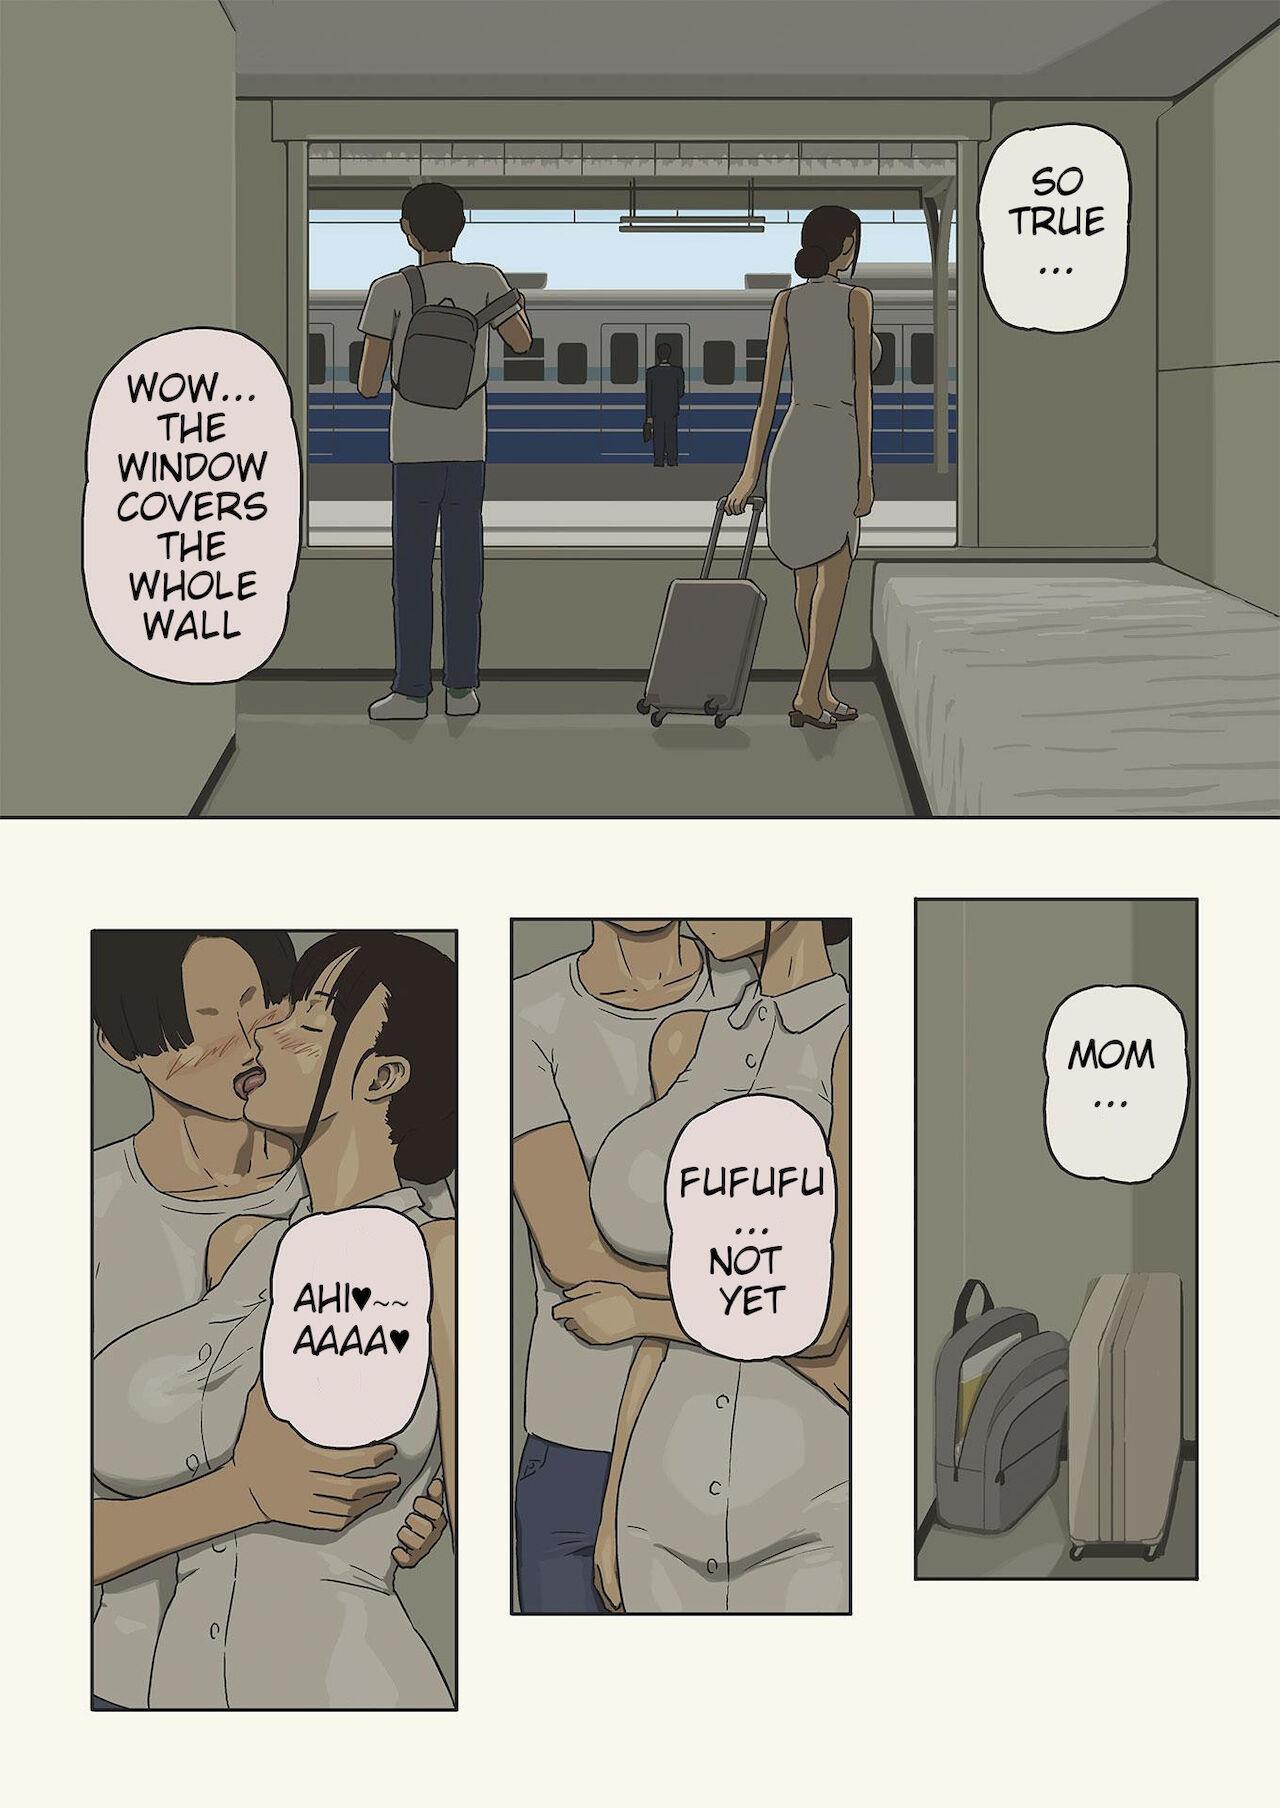 Teenie Share 4 - A Parent and Child in the Window of a Train Car Seeking Love and Sex - Original Gay Boyporn - Page 6